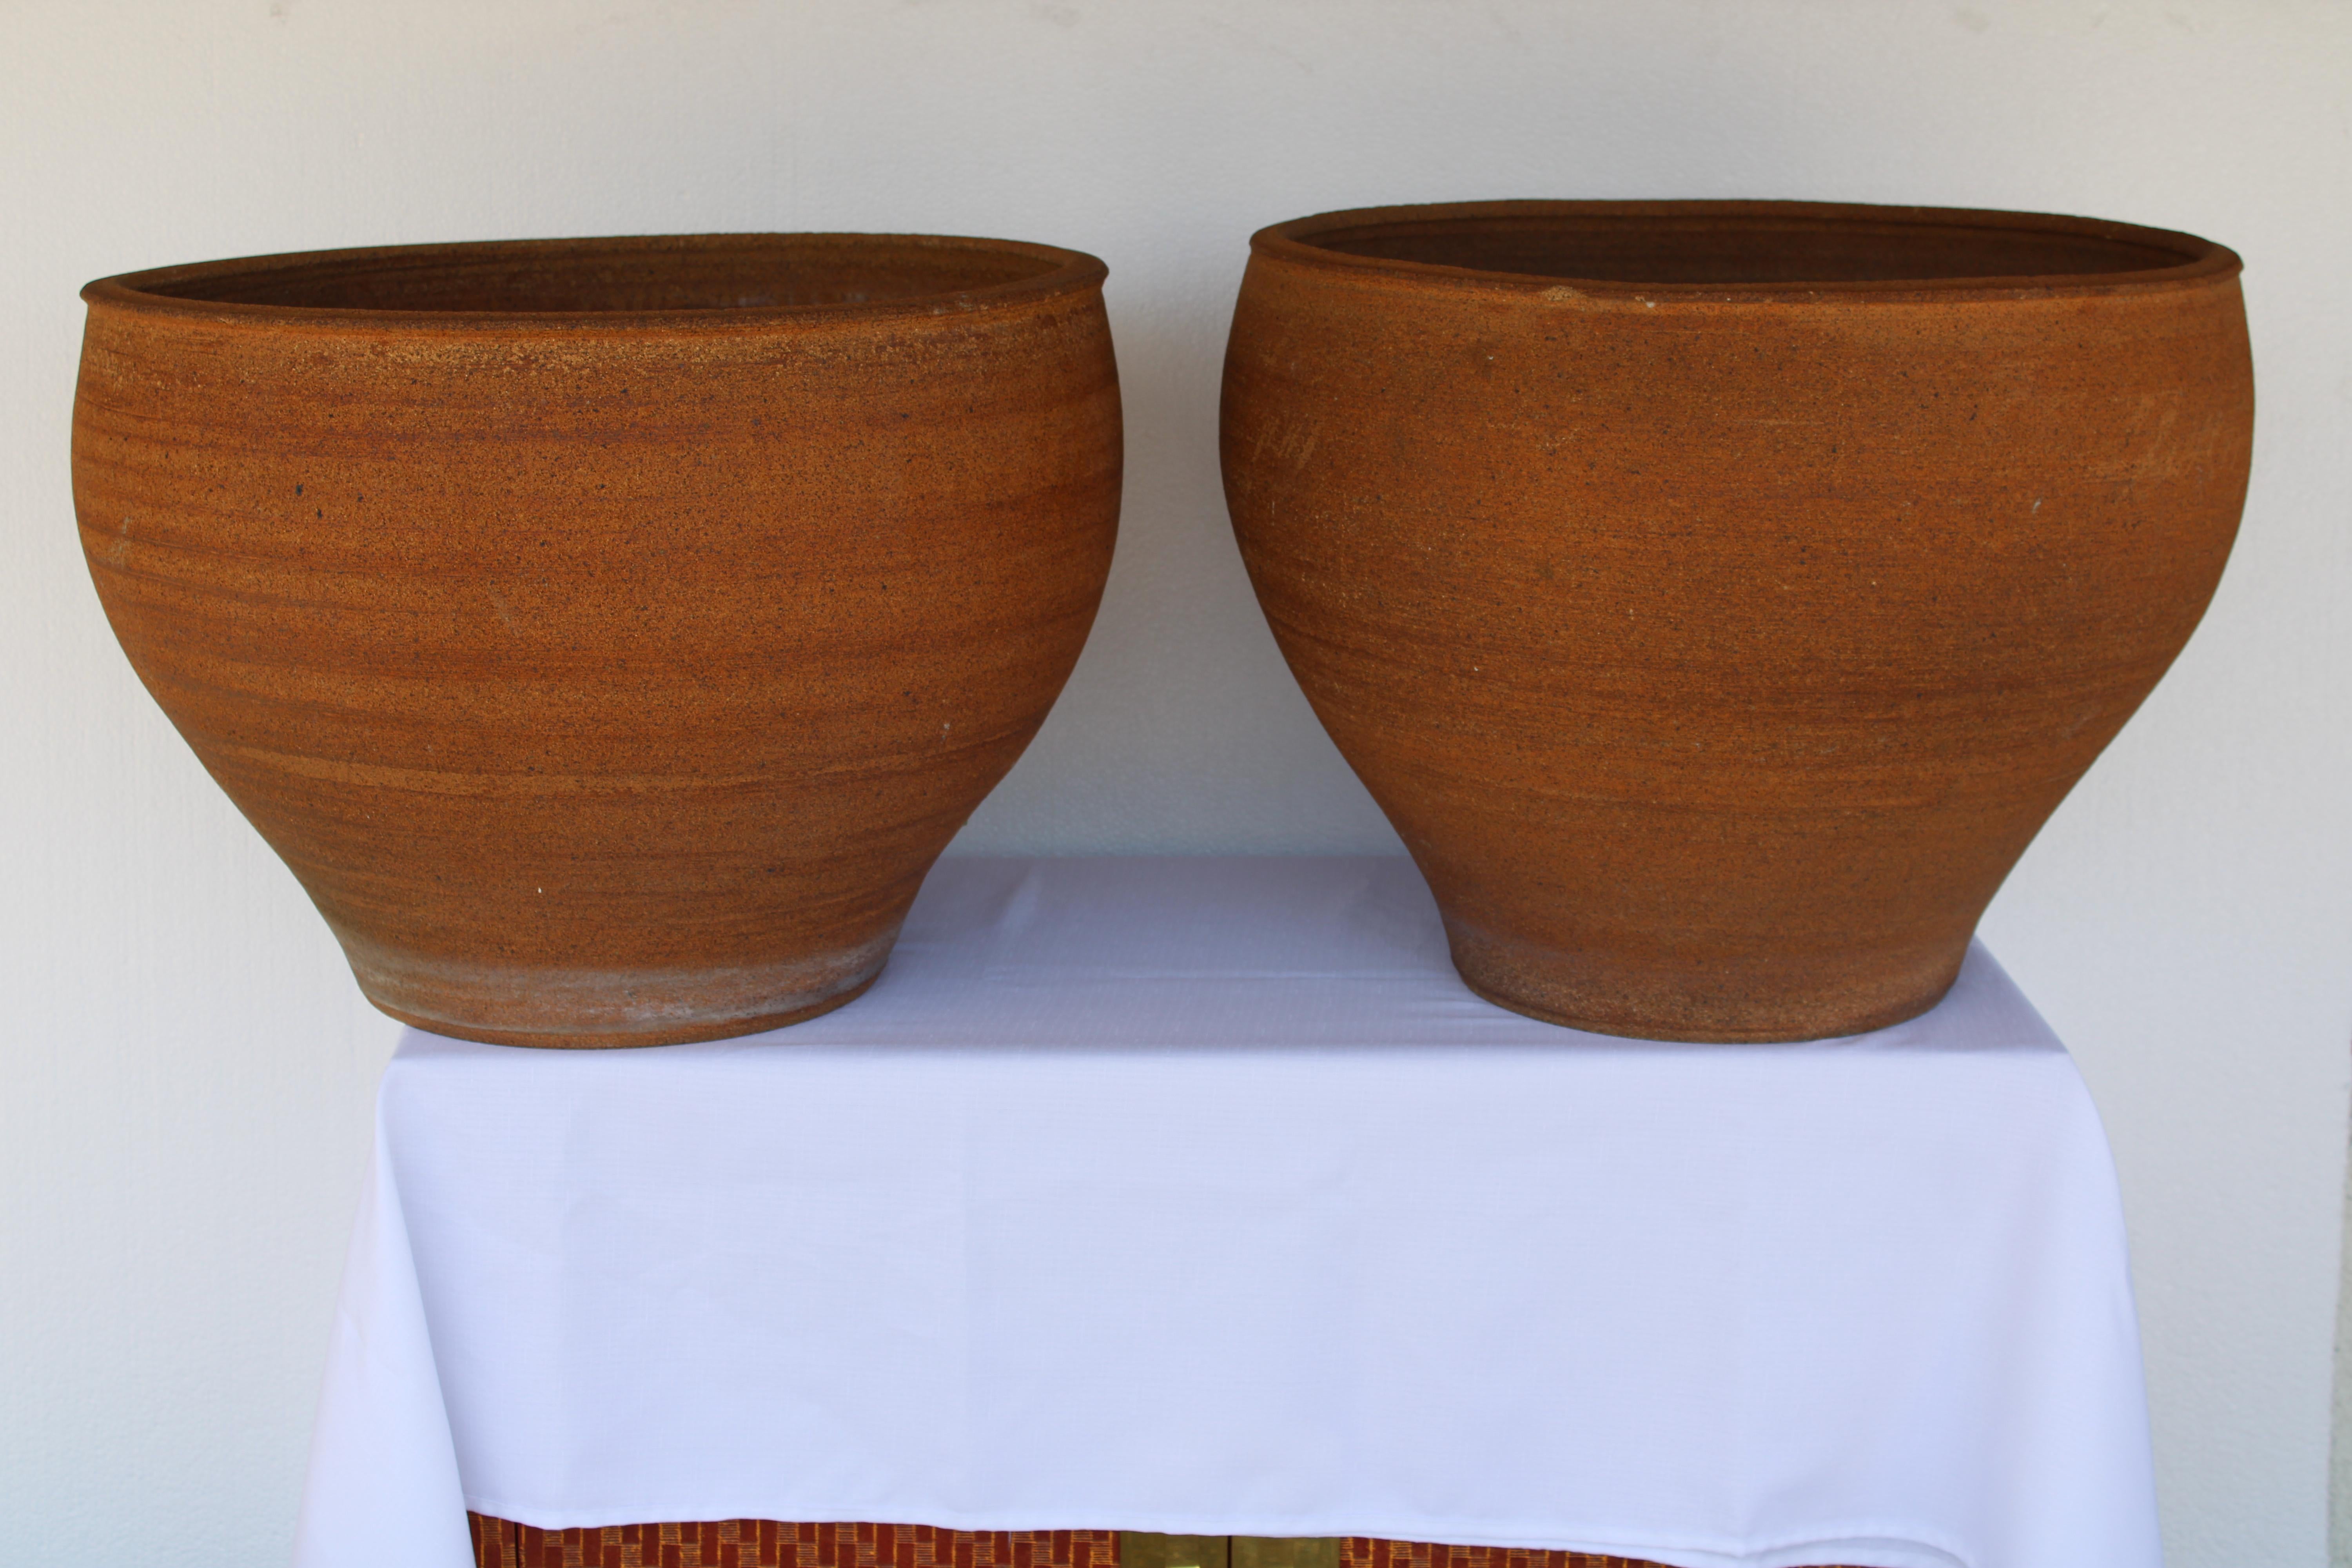 Pair of stoneware planters by David Cressey. These are hand thrown and were probably a custom order. These stoneware planters have an unglazed interior as well as an unglazed natural warm brown clay exterior with the iconic 